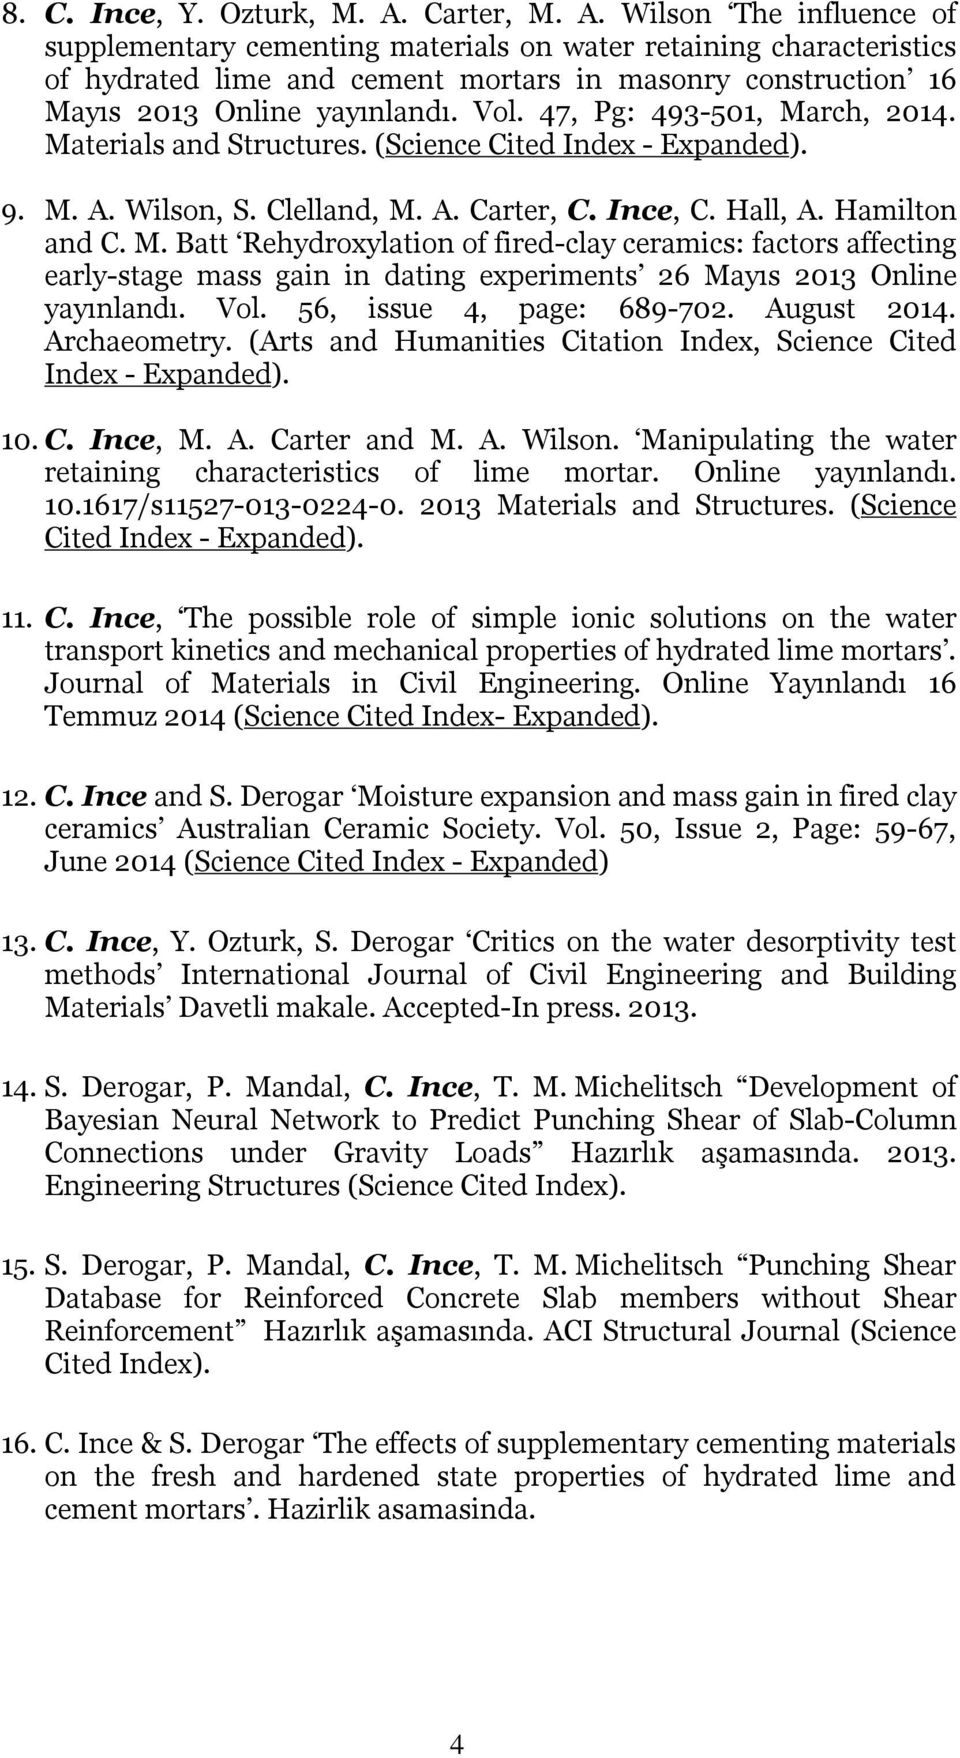 Vol. 47, Pg: 493-501, March, 2014. Materials and Structures. (Science Cited Index - Expanded). 9. M. A. Wilson, S. Clelland, M. A. Carter, C. Ince, C. Hall, A. Hamilton and C. M. Batt Rehydroxylation of fired-clay ceramics: factors affecting early-stage mass gain in dating experiments 26 Mayıs 2013 Online yayınlandı.